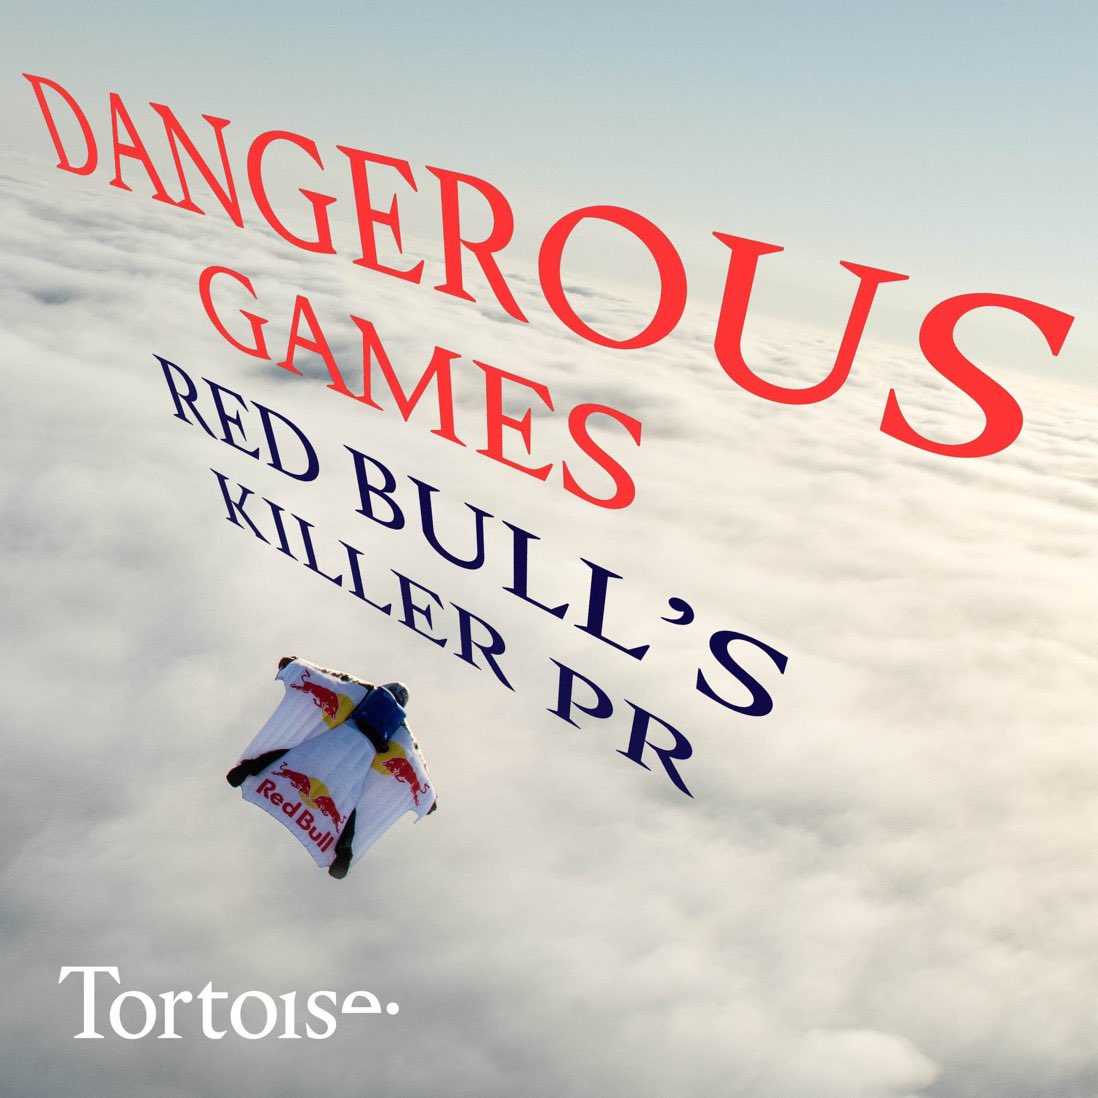 NEW: Red Bull has built a billion-dollar brand promoting extreme sports. But when things go wrong and the worst happens - who’s responsible? @tortoise lnk.to/Rr3Bfo